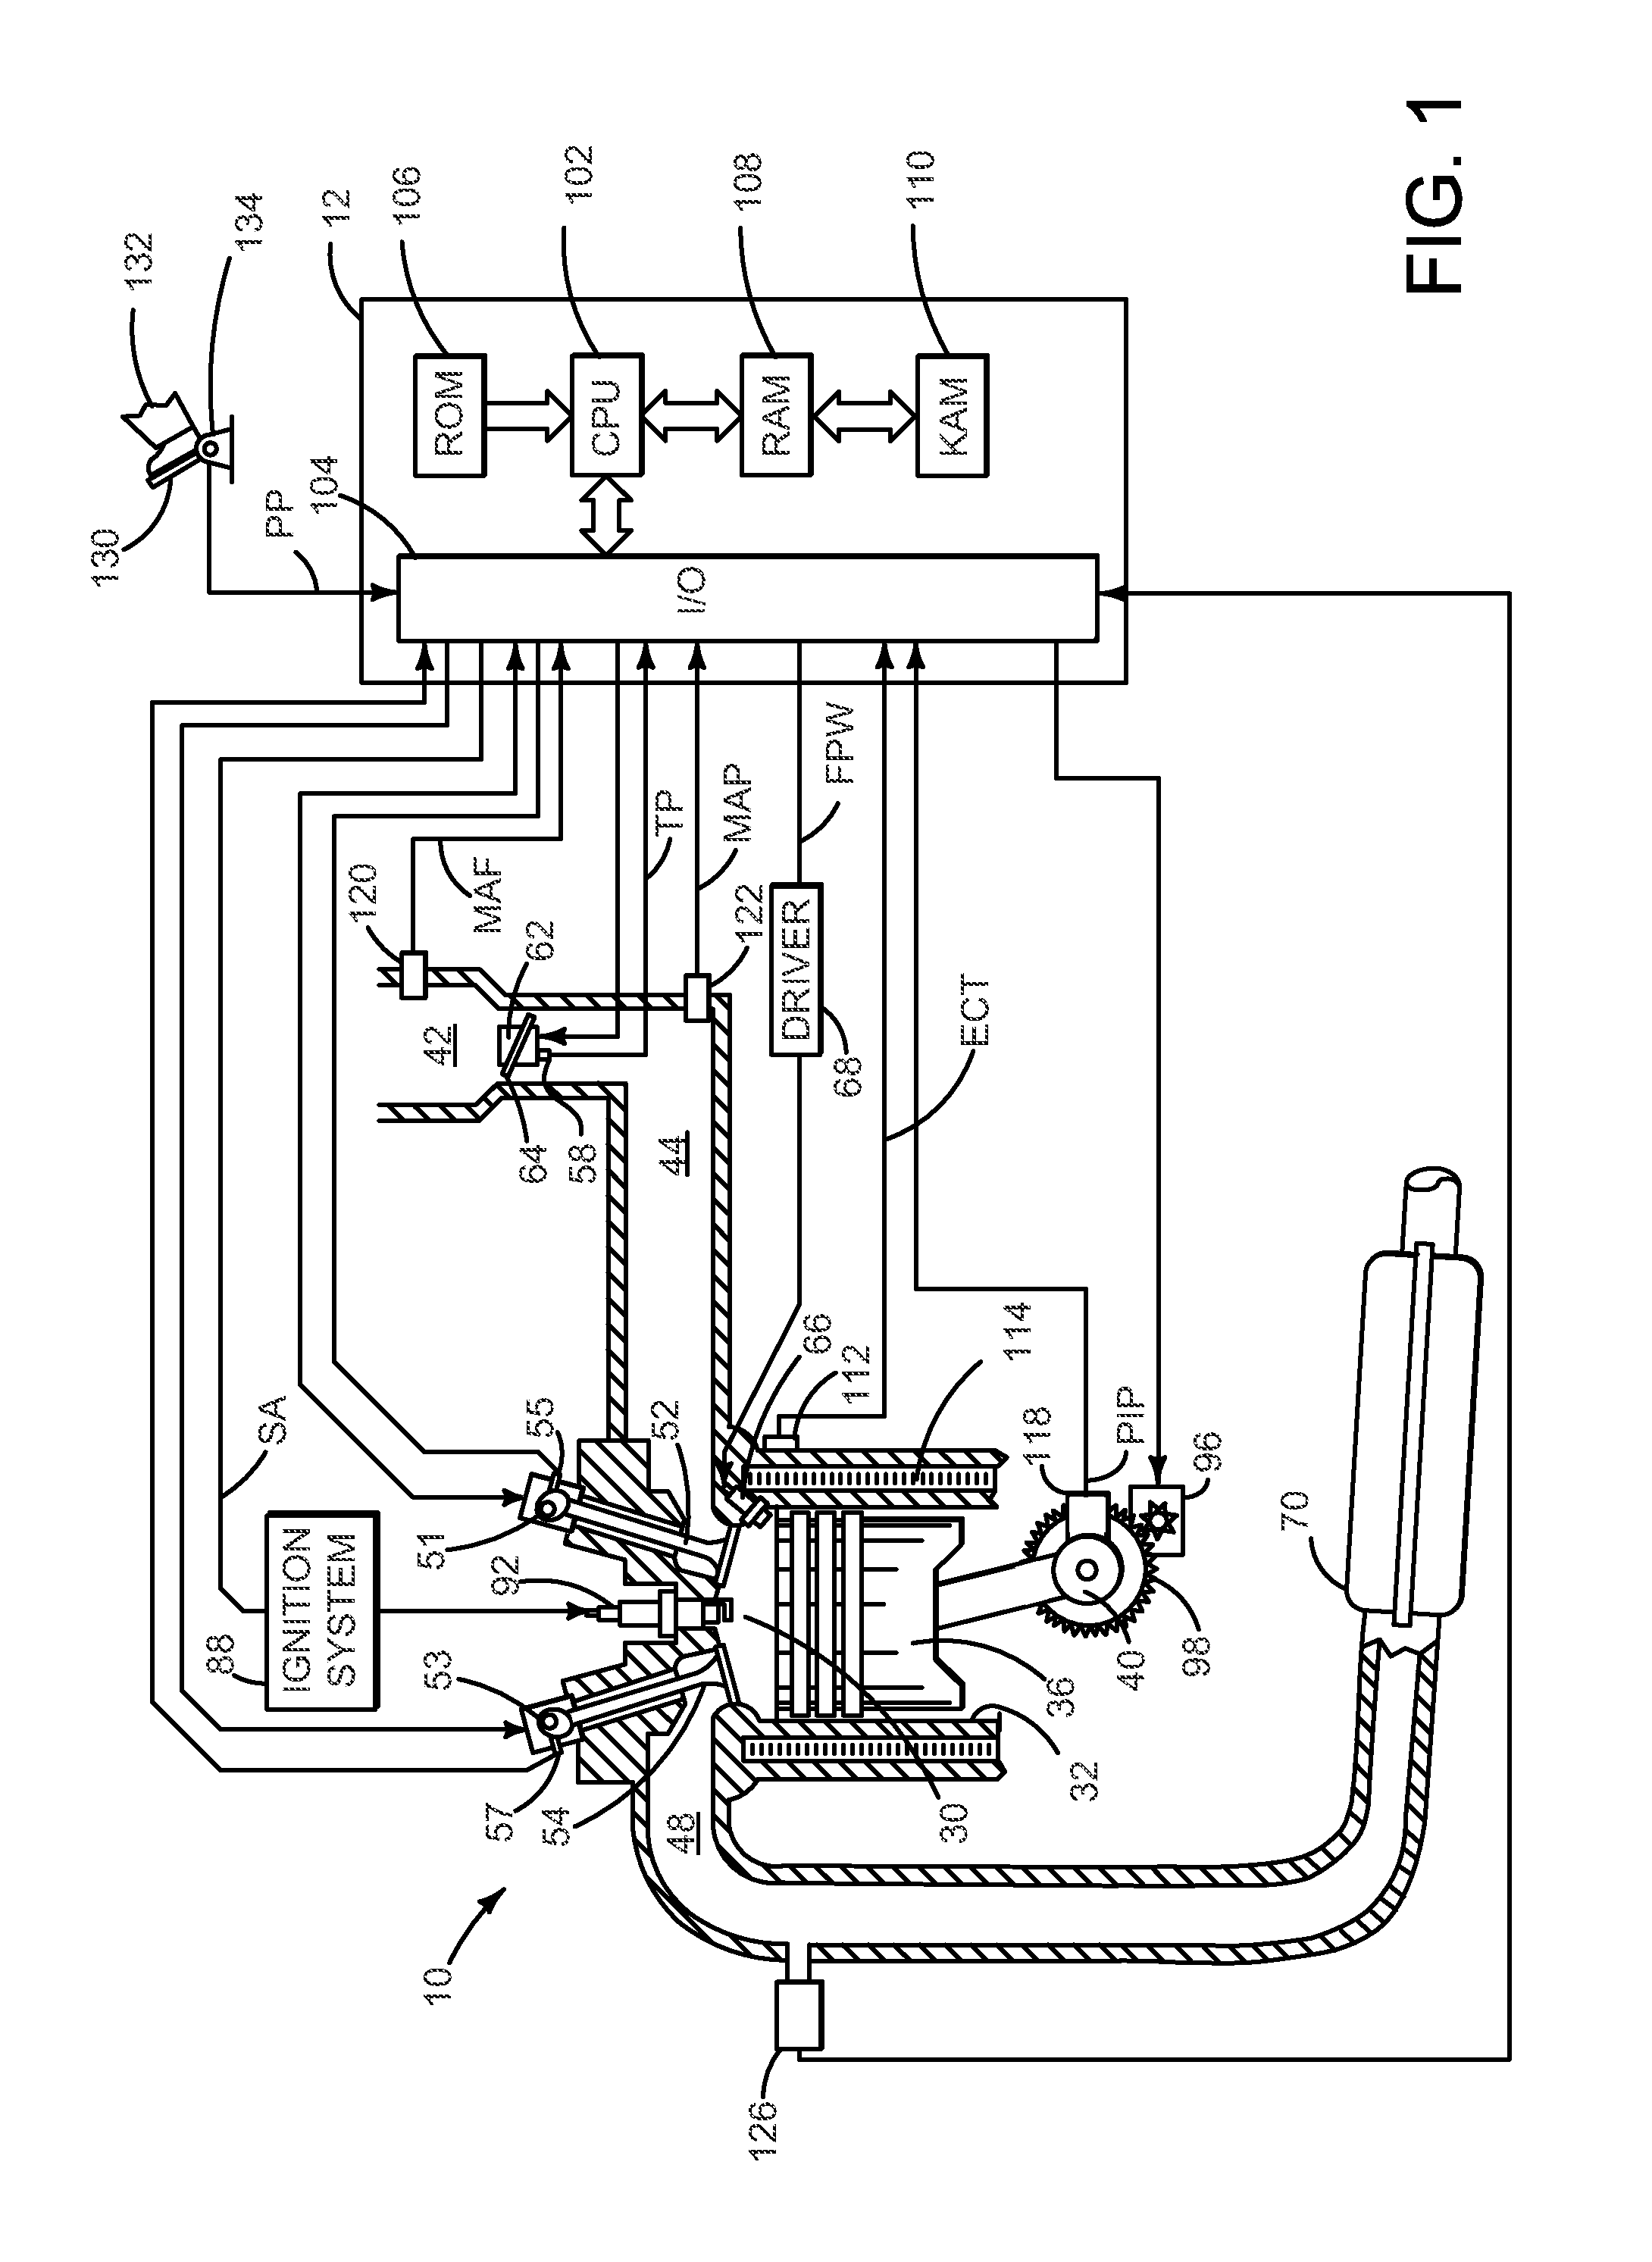 Method and system for opportunistically automatically stopping an engine of a vehicle